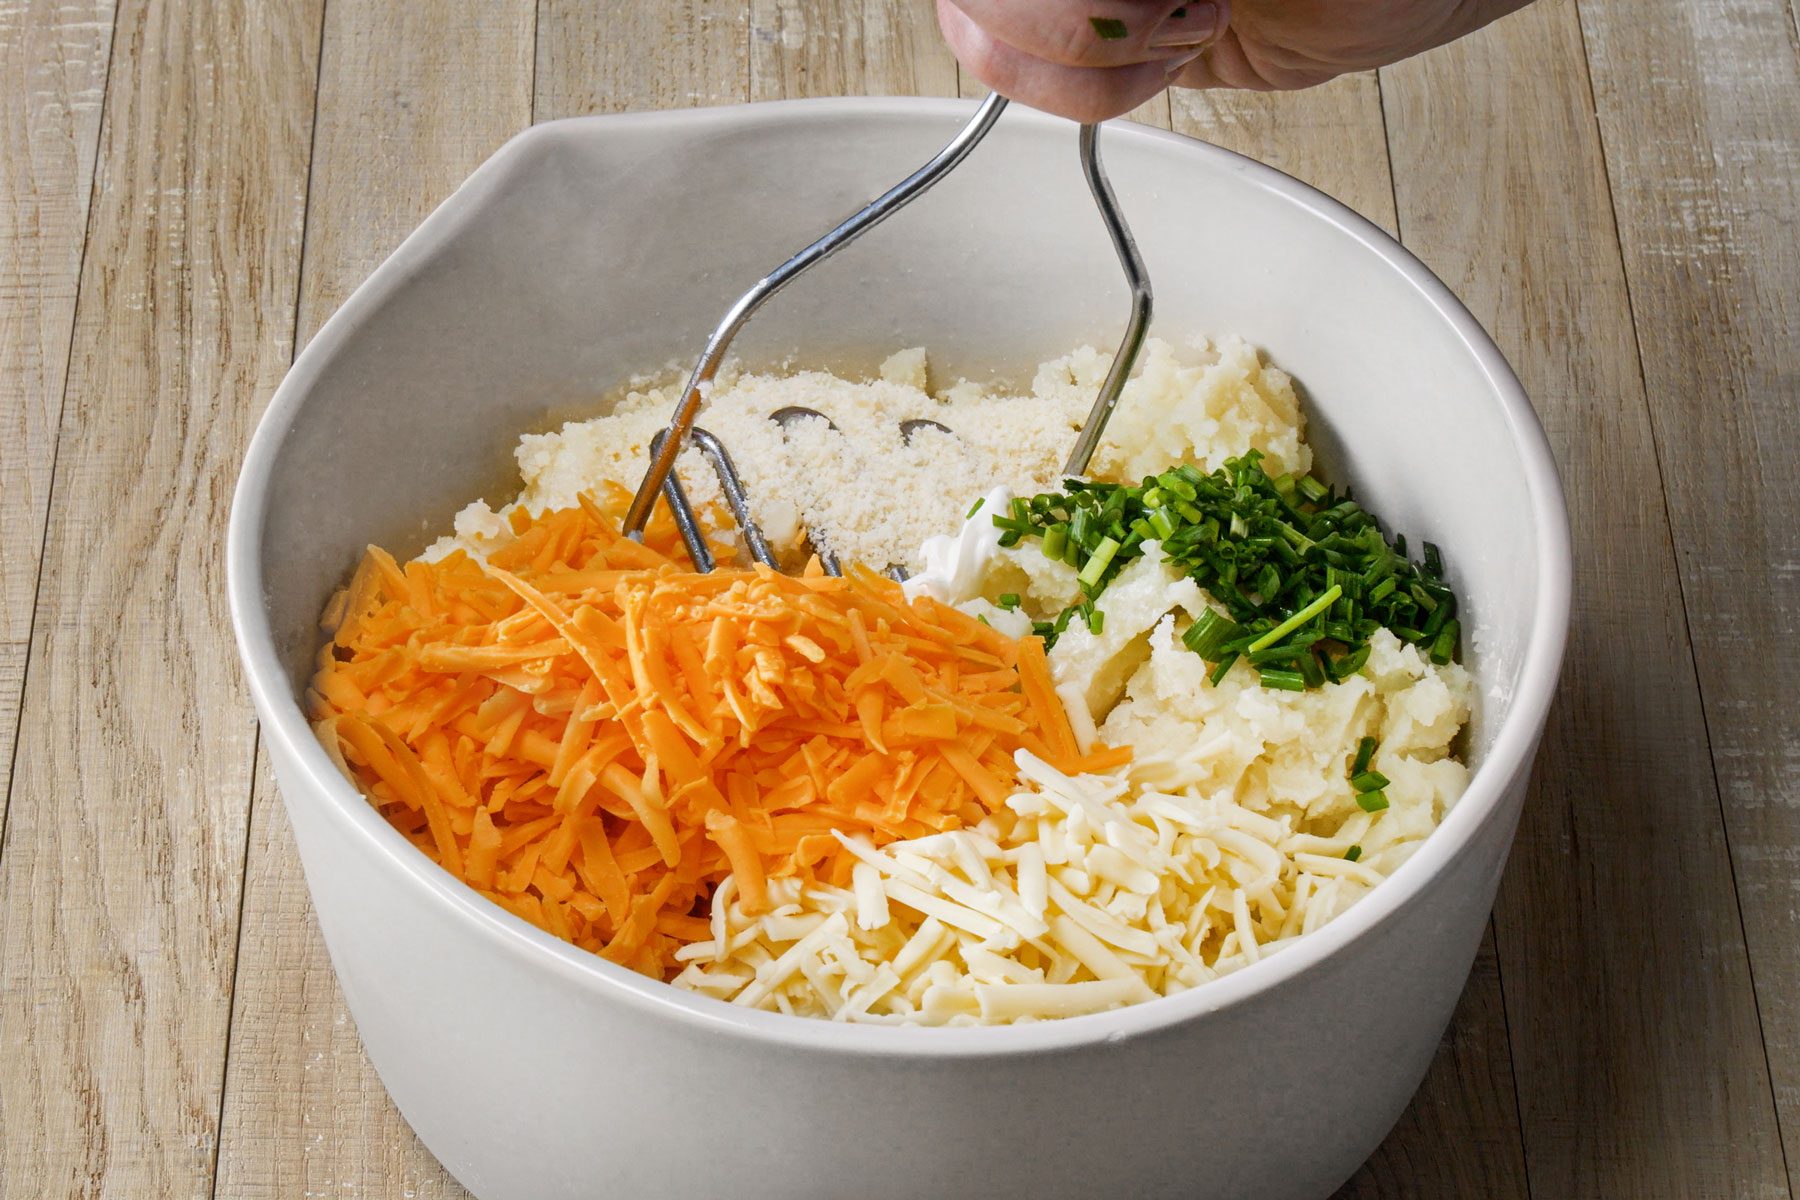 Potato pulp cheese and other ingredients mixed in a large bowl